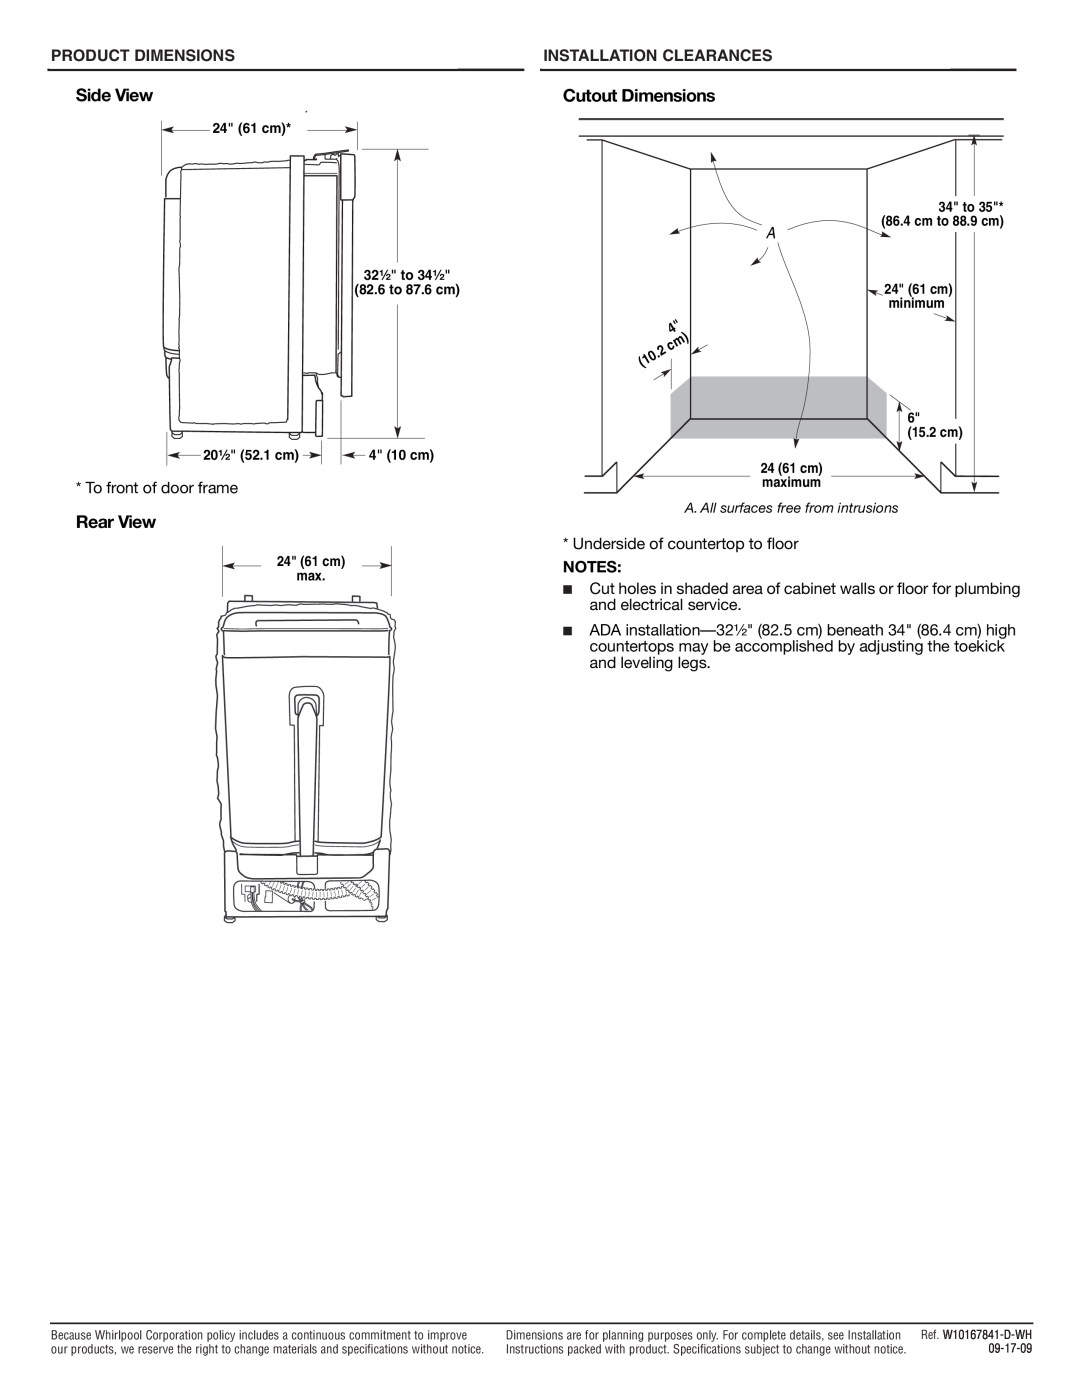 Whirlpool GU3100XTV specifications Product Dimensions, Installation Clearances, Side View, Rear View, Cutout Dimensions 